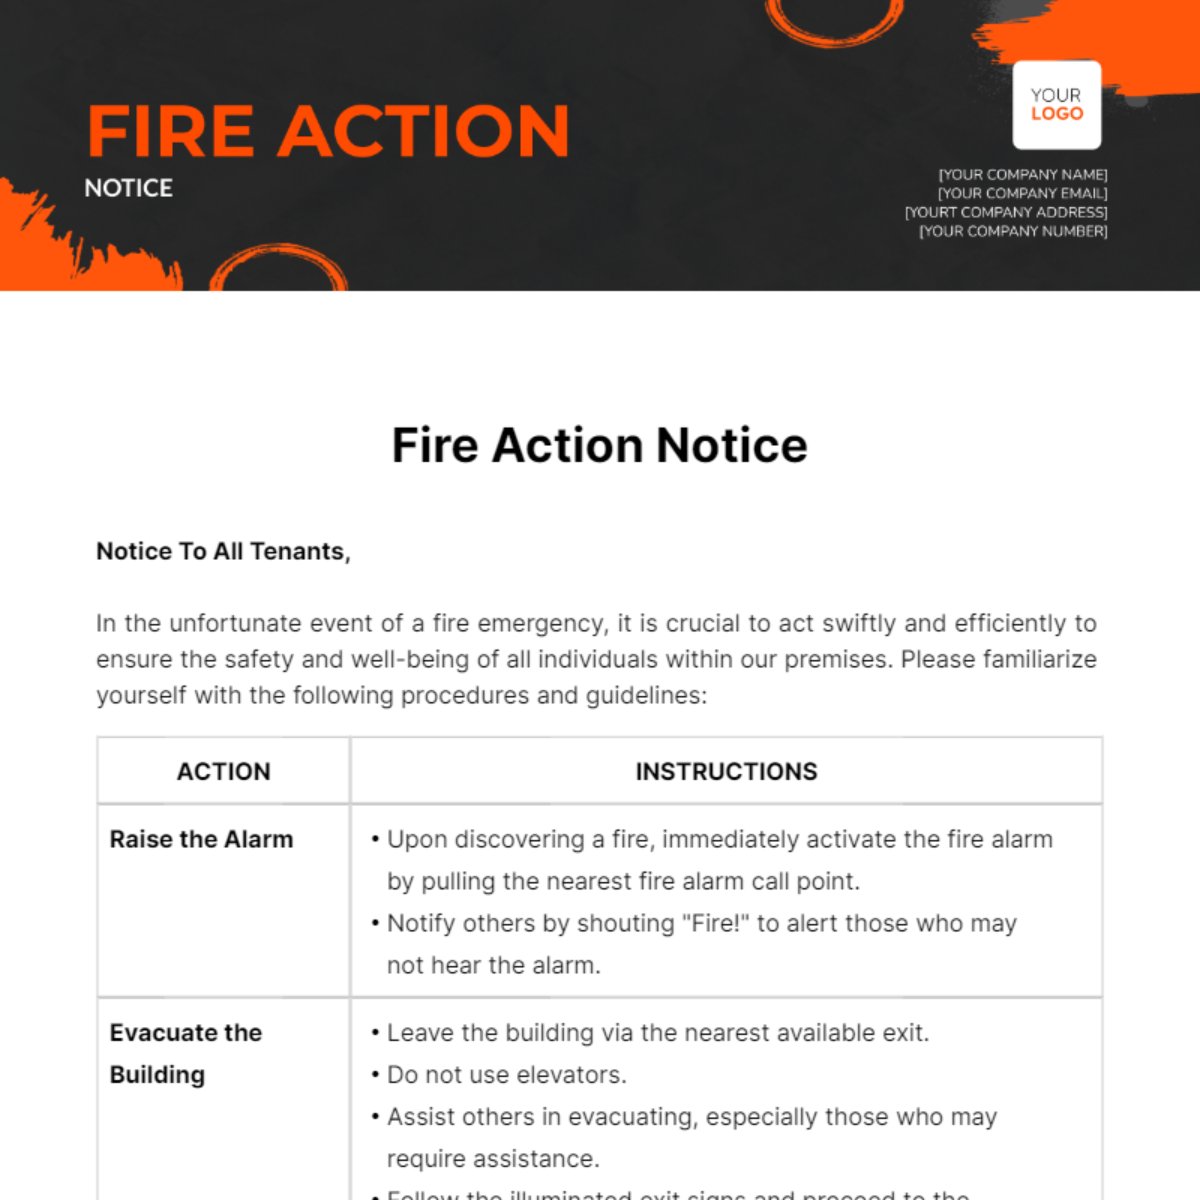 Fire Action Notice Template